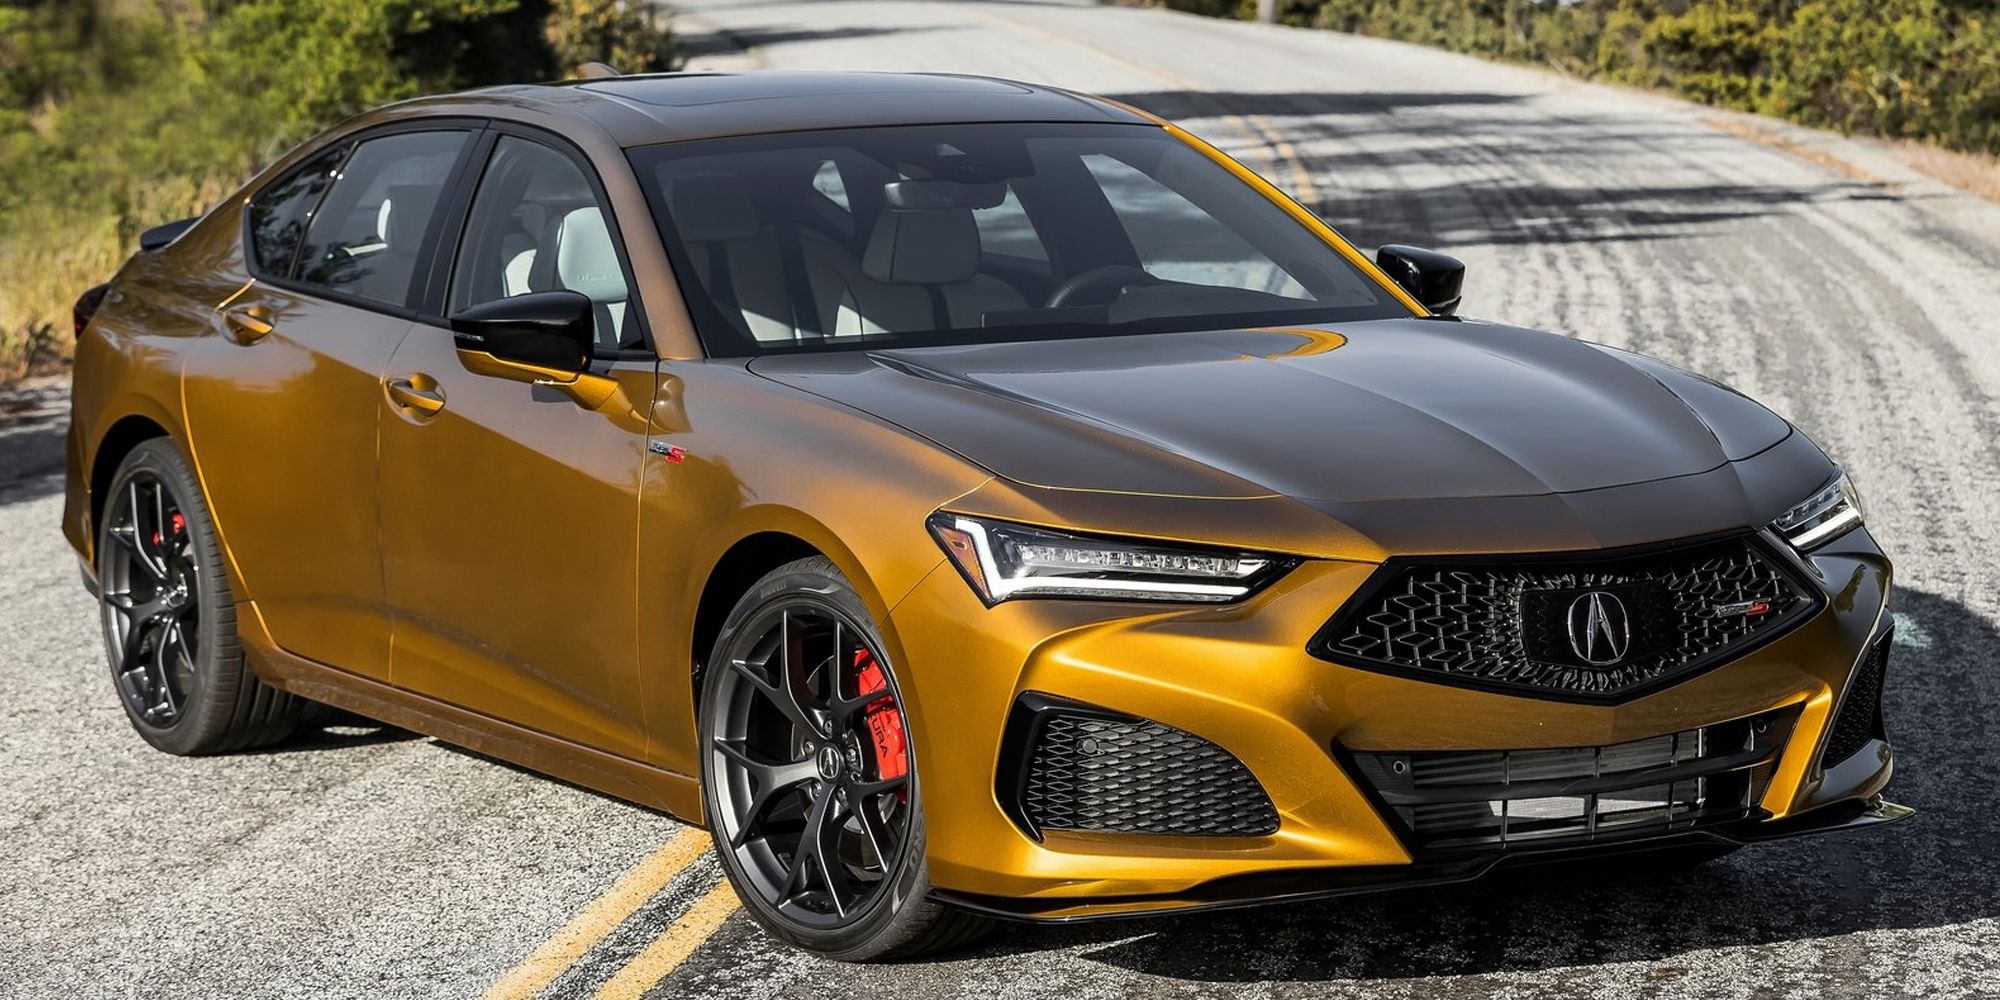 Front 3/4 view of a yellow TLX Type-S